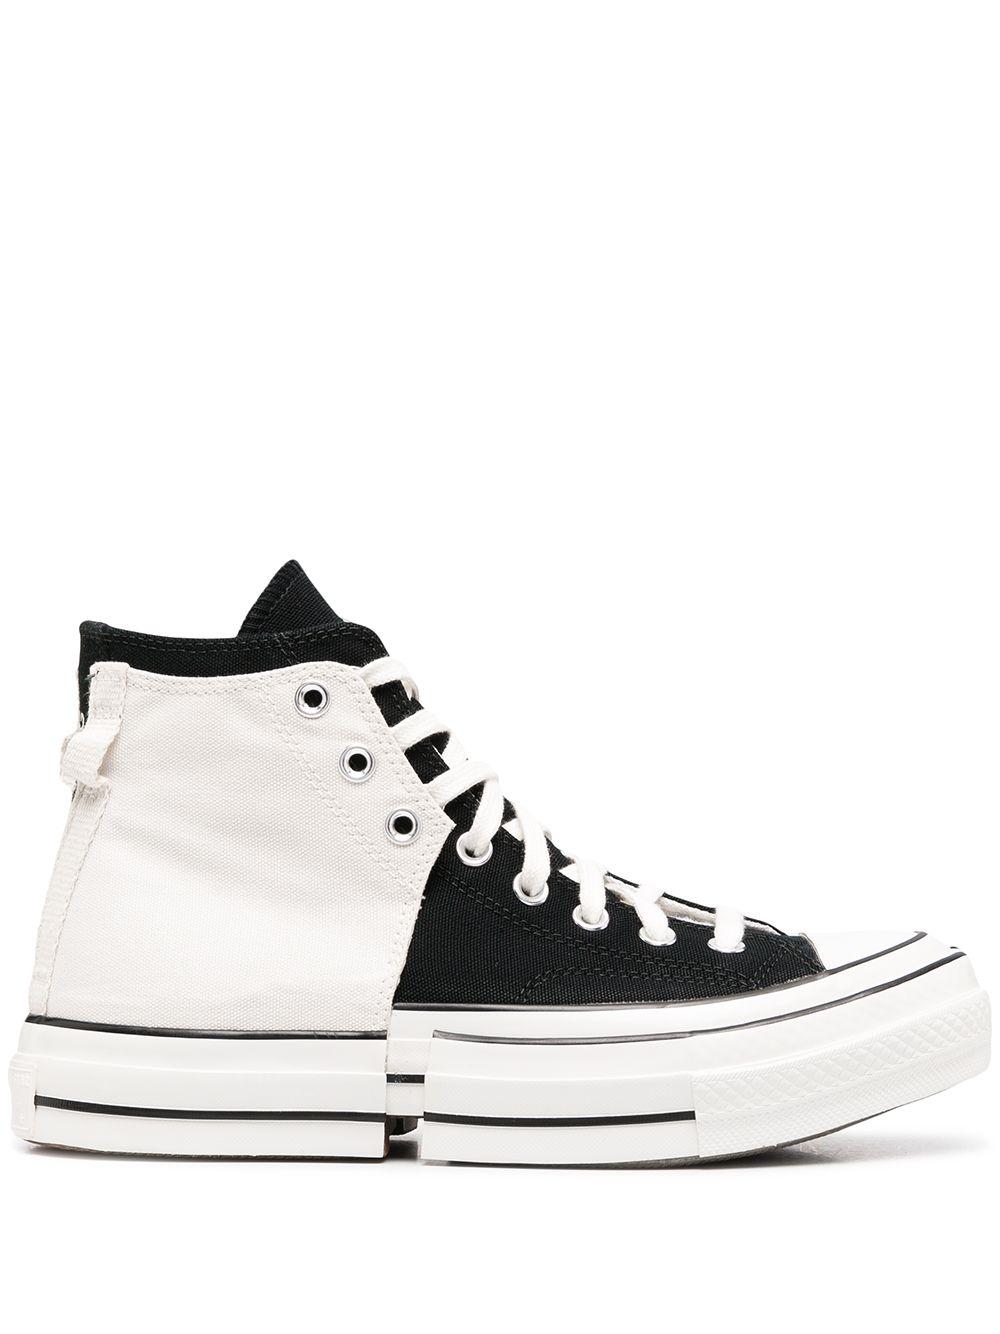 Converse X Feng Chen Wang High Top Trainers in Black | Lyst